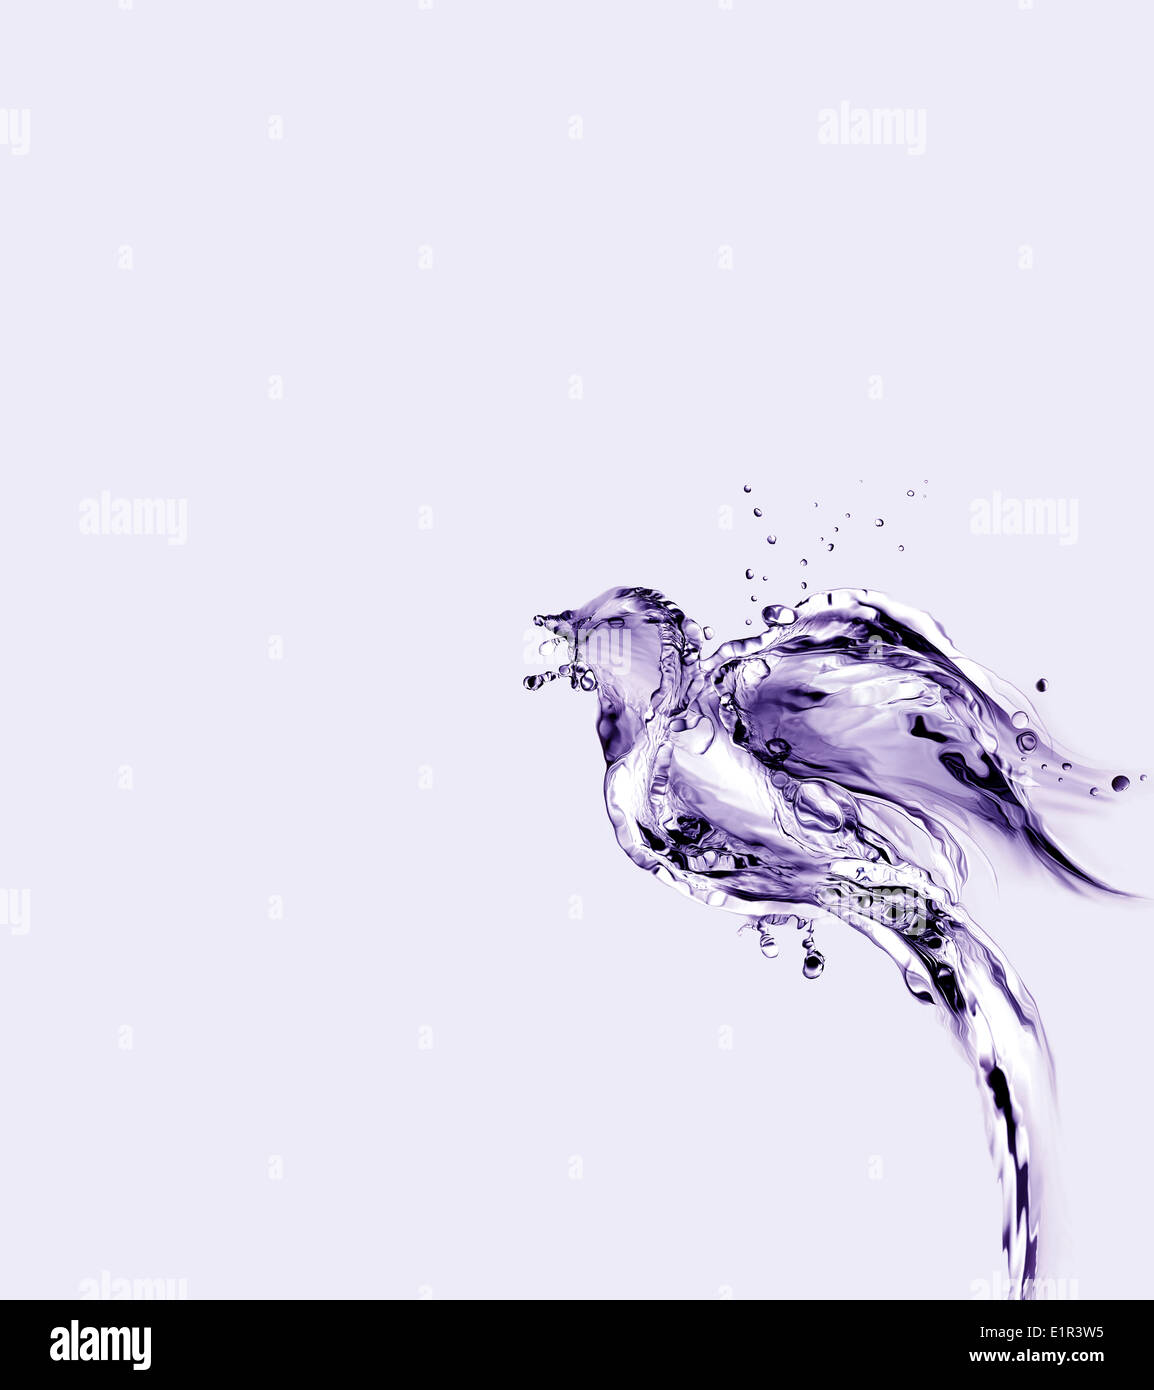 A violet bird made of water flying away. Stock Photo